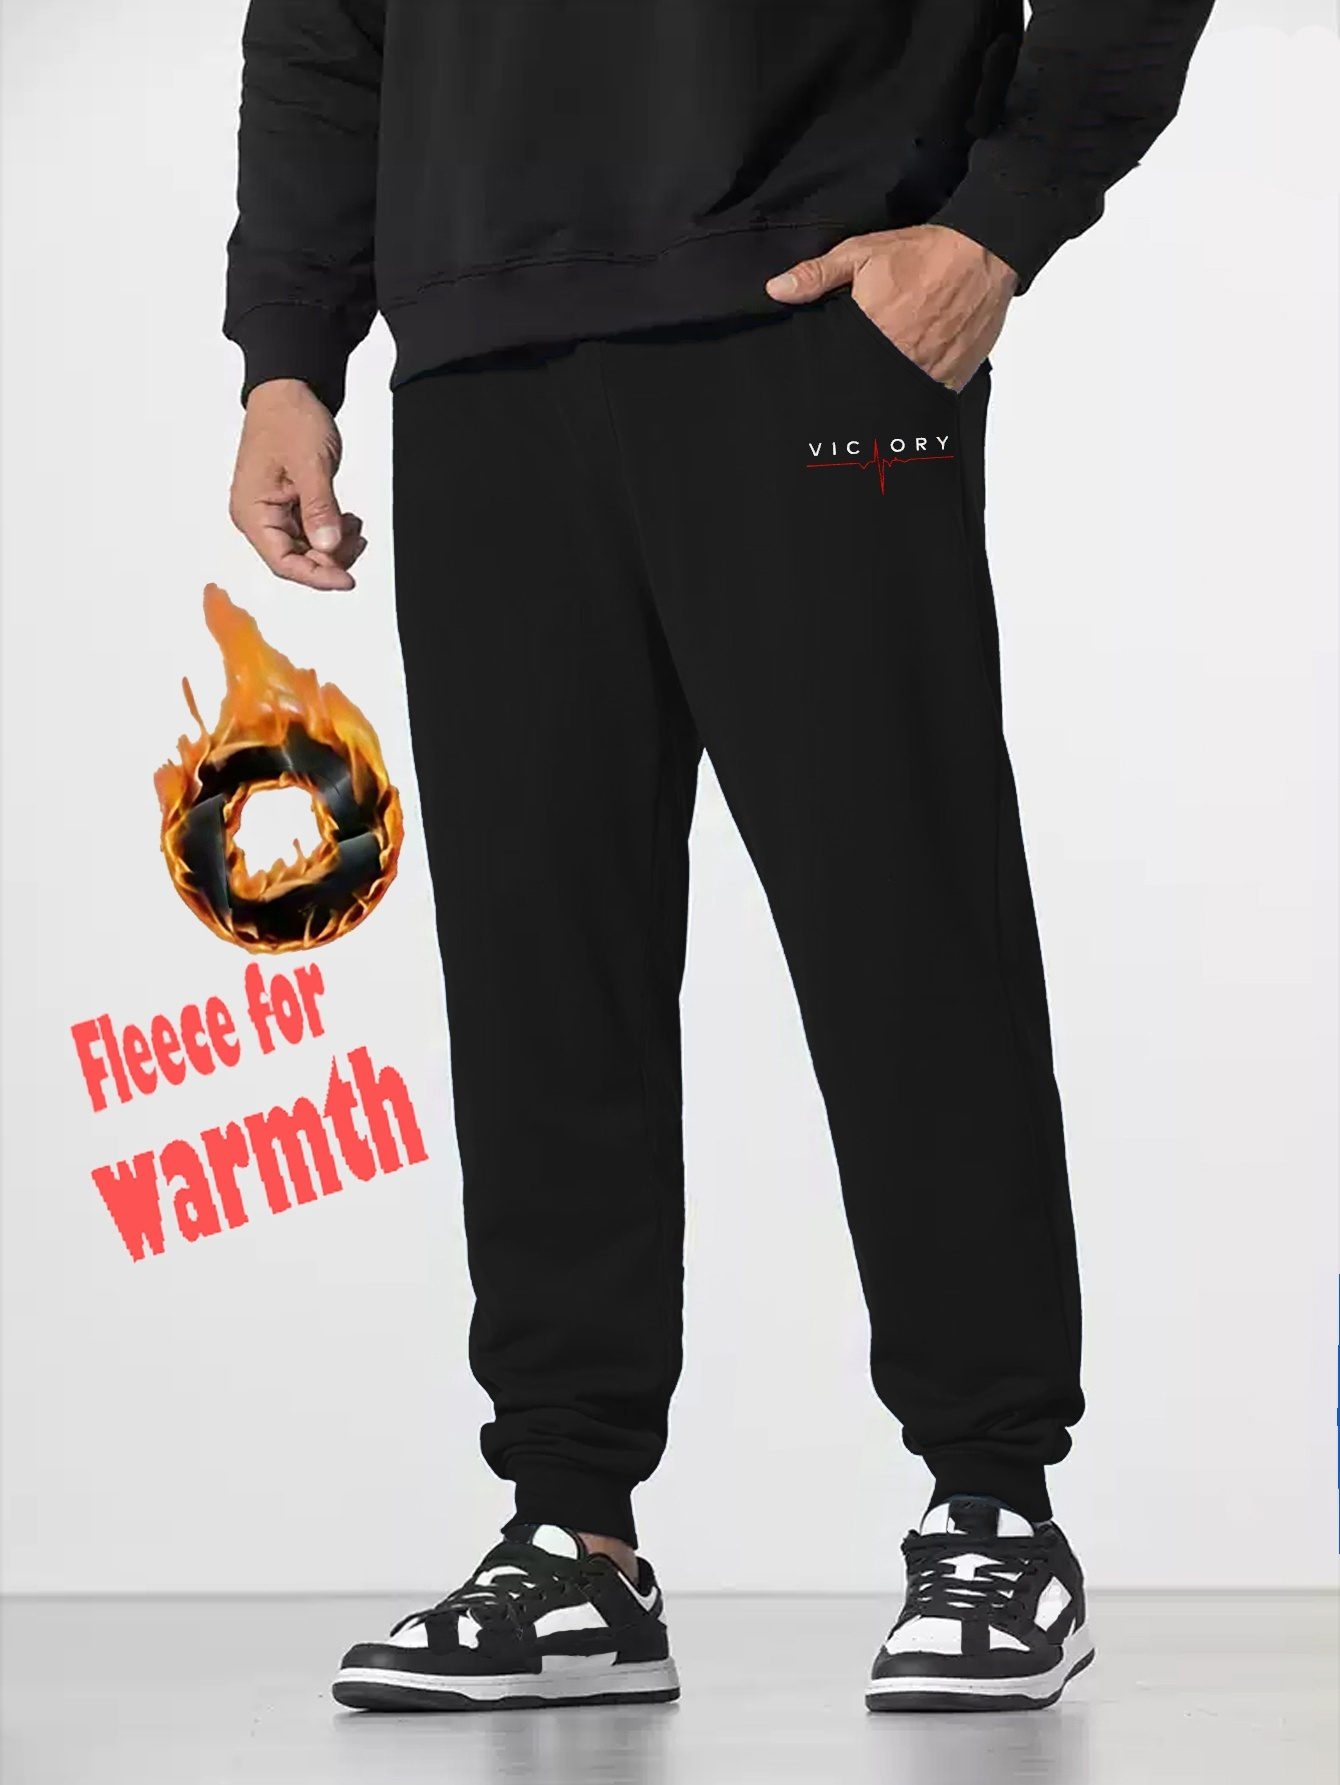 Sherpa Lined Sweatpants For Men Winter Warm Drawstring Fleece Pants Casual  Comfy Outdoor Trousers With Pockets